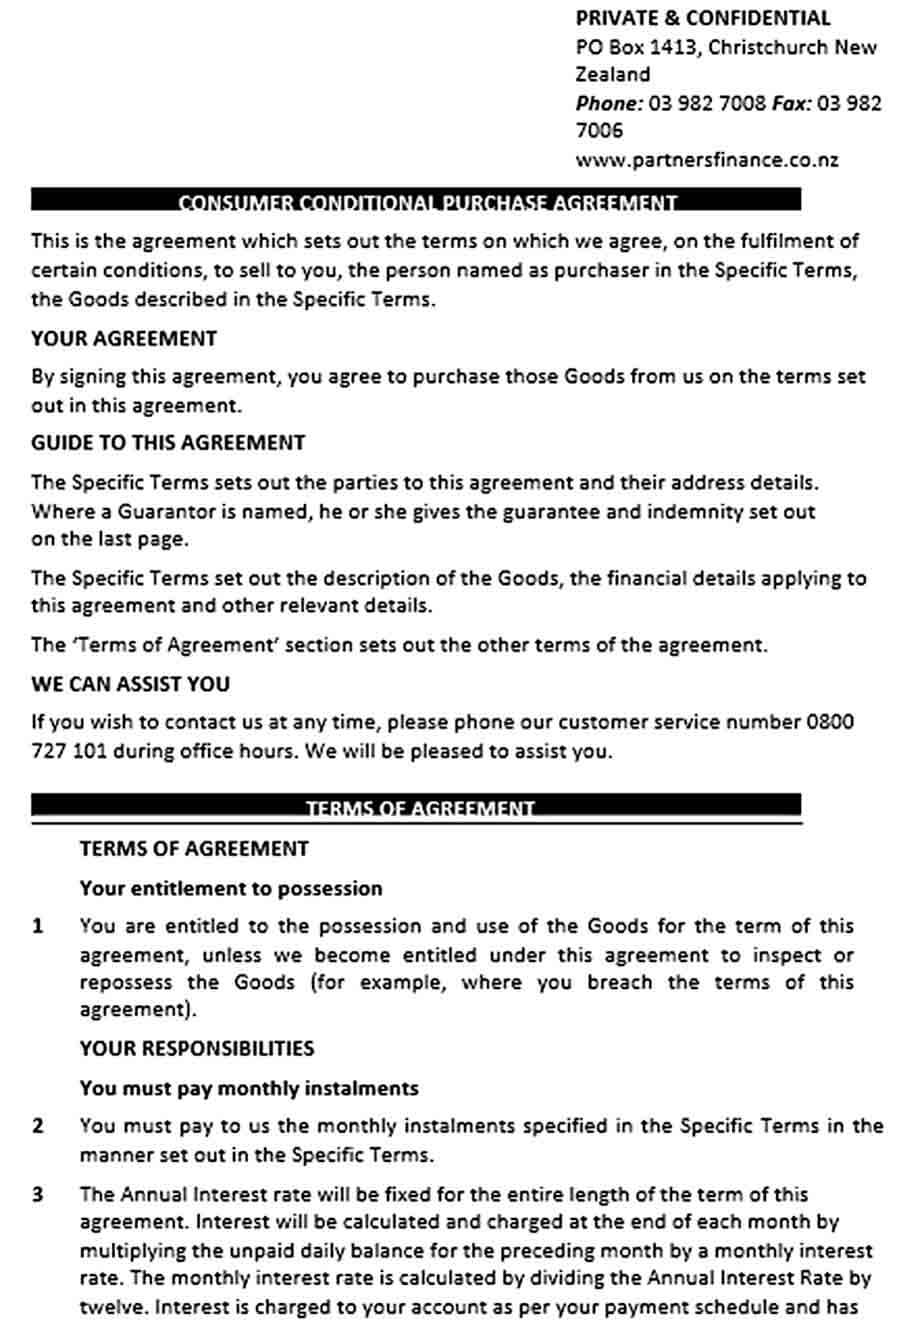 Sample Consumer Conditional Purchase Agreement Template